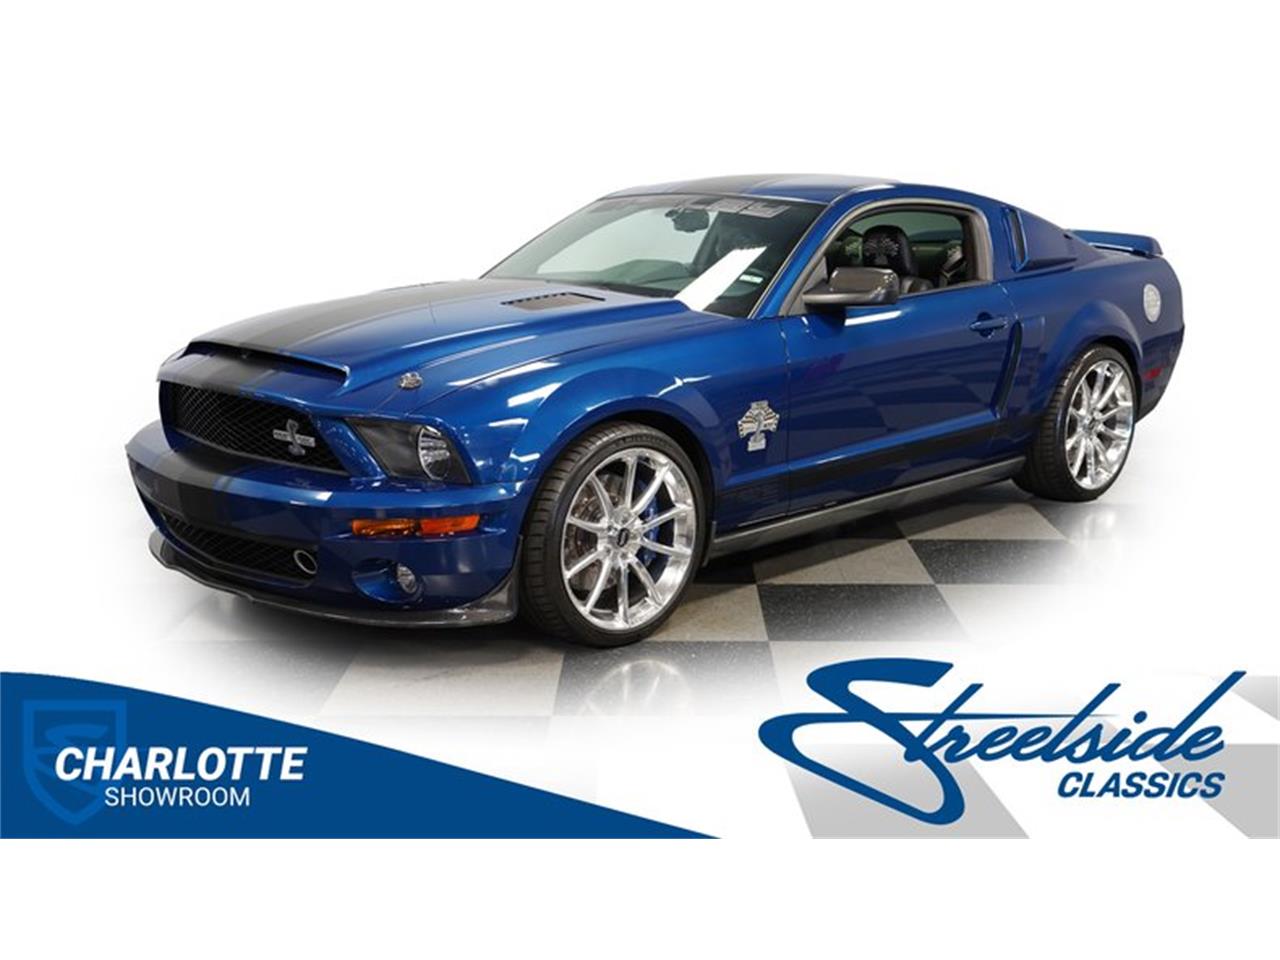 For Sale: 2008 Shelby GT500 in Concord, North Carolina for sale in Concord, NC